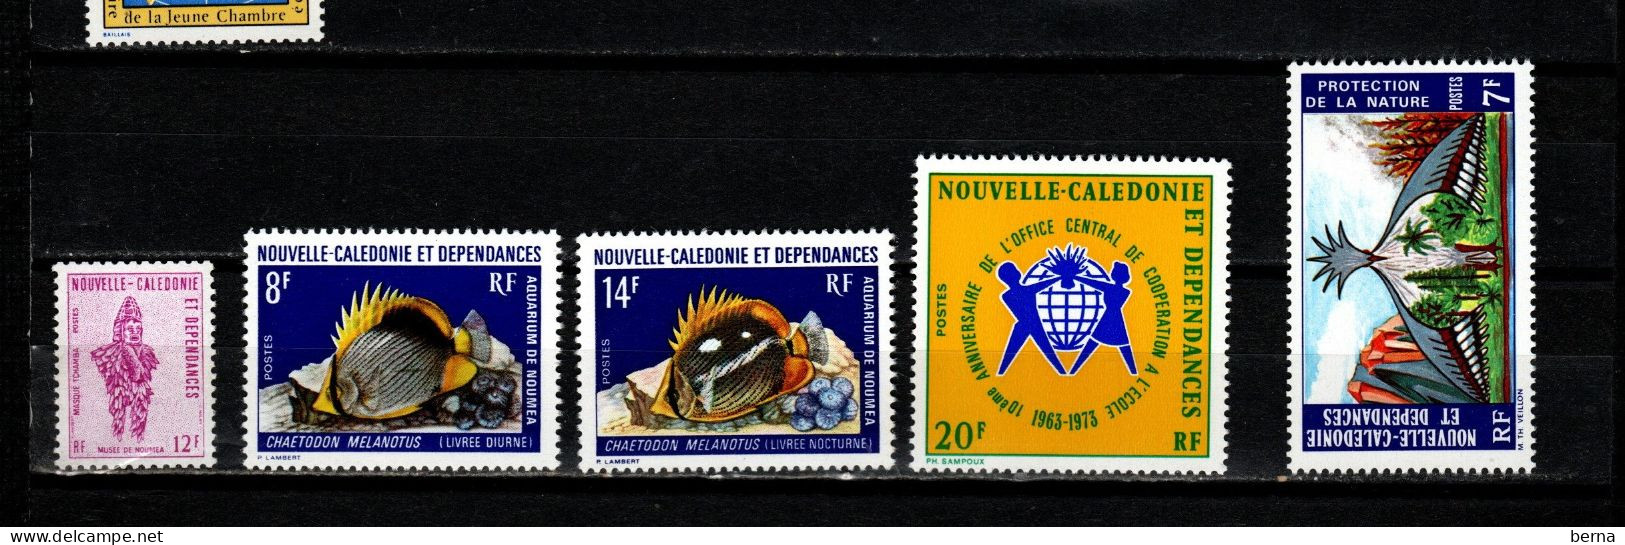 NOUVELLE CALEDONIE ANNEES 1973-1974  COMPLETES 386/390 LUXE NEUF SANS CHARNIERE - Annate Complete